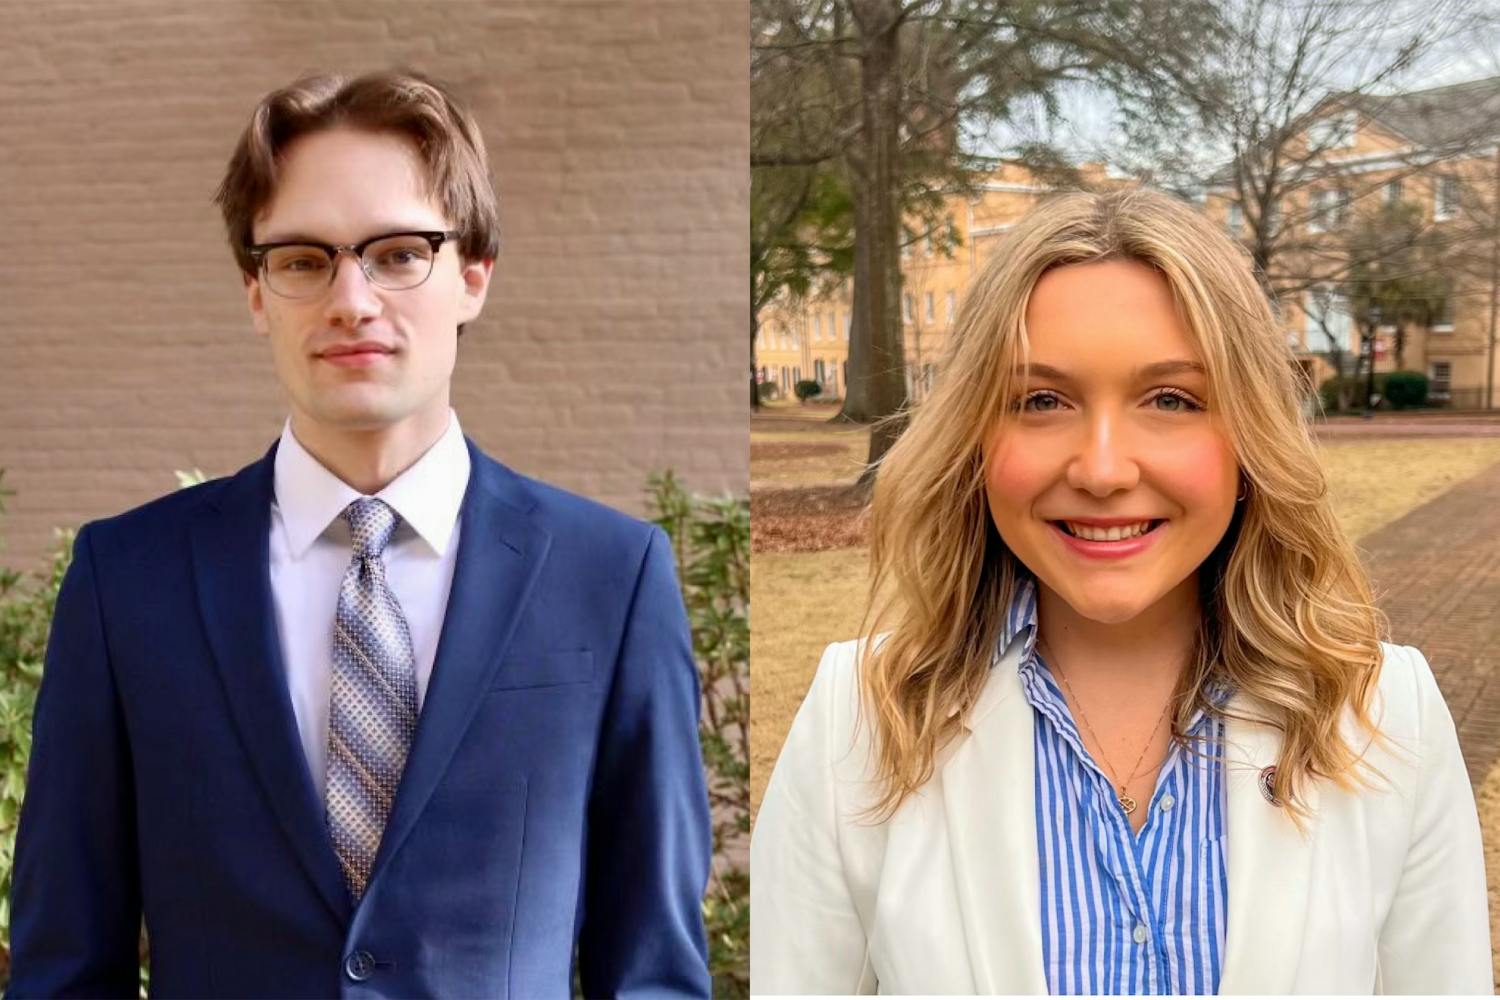 Brandon Badinski (left) and Hannah Augsbach Lamma (right) are the candidates running to be the next ɫɫƵ body treasurer. Students can vote for candidates from Feb. 21 at 9 a.m. to Feb. 22 at 5 p.m.&nbsp;